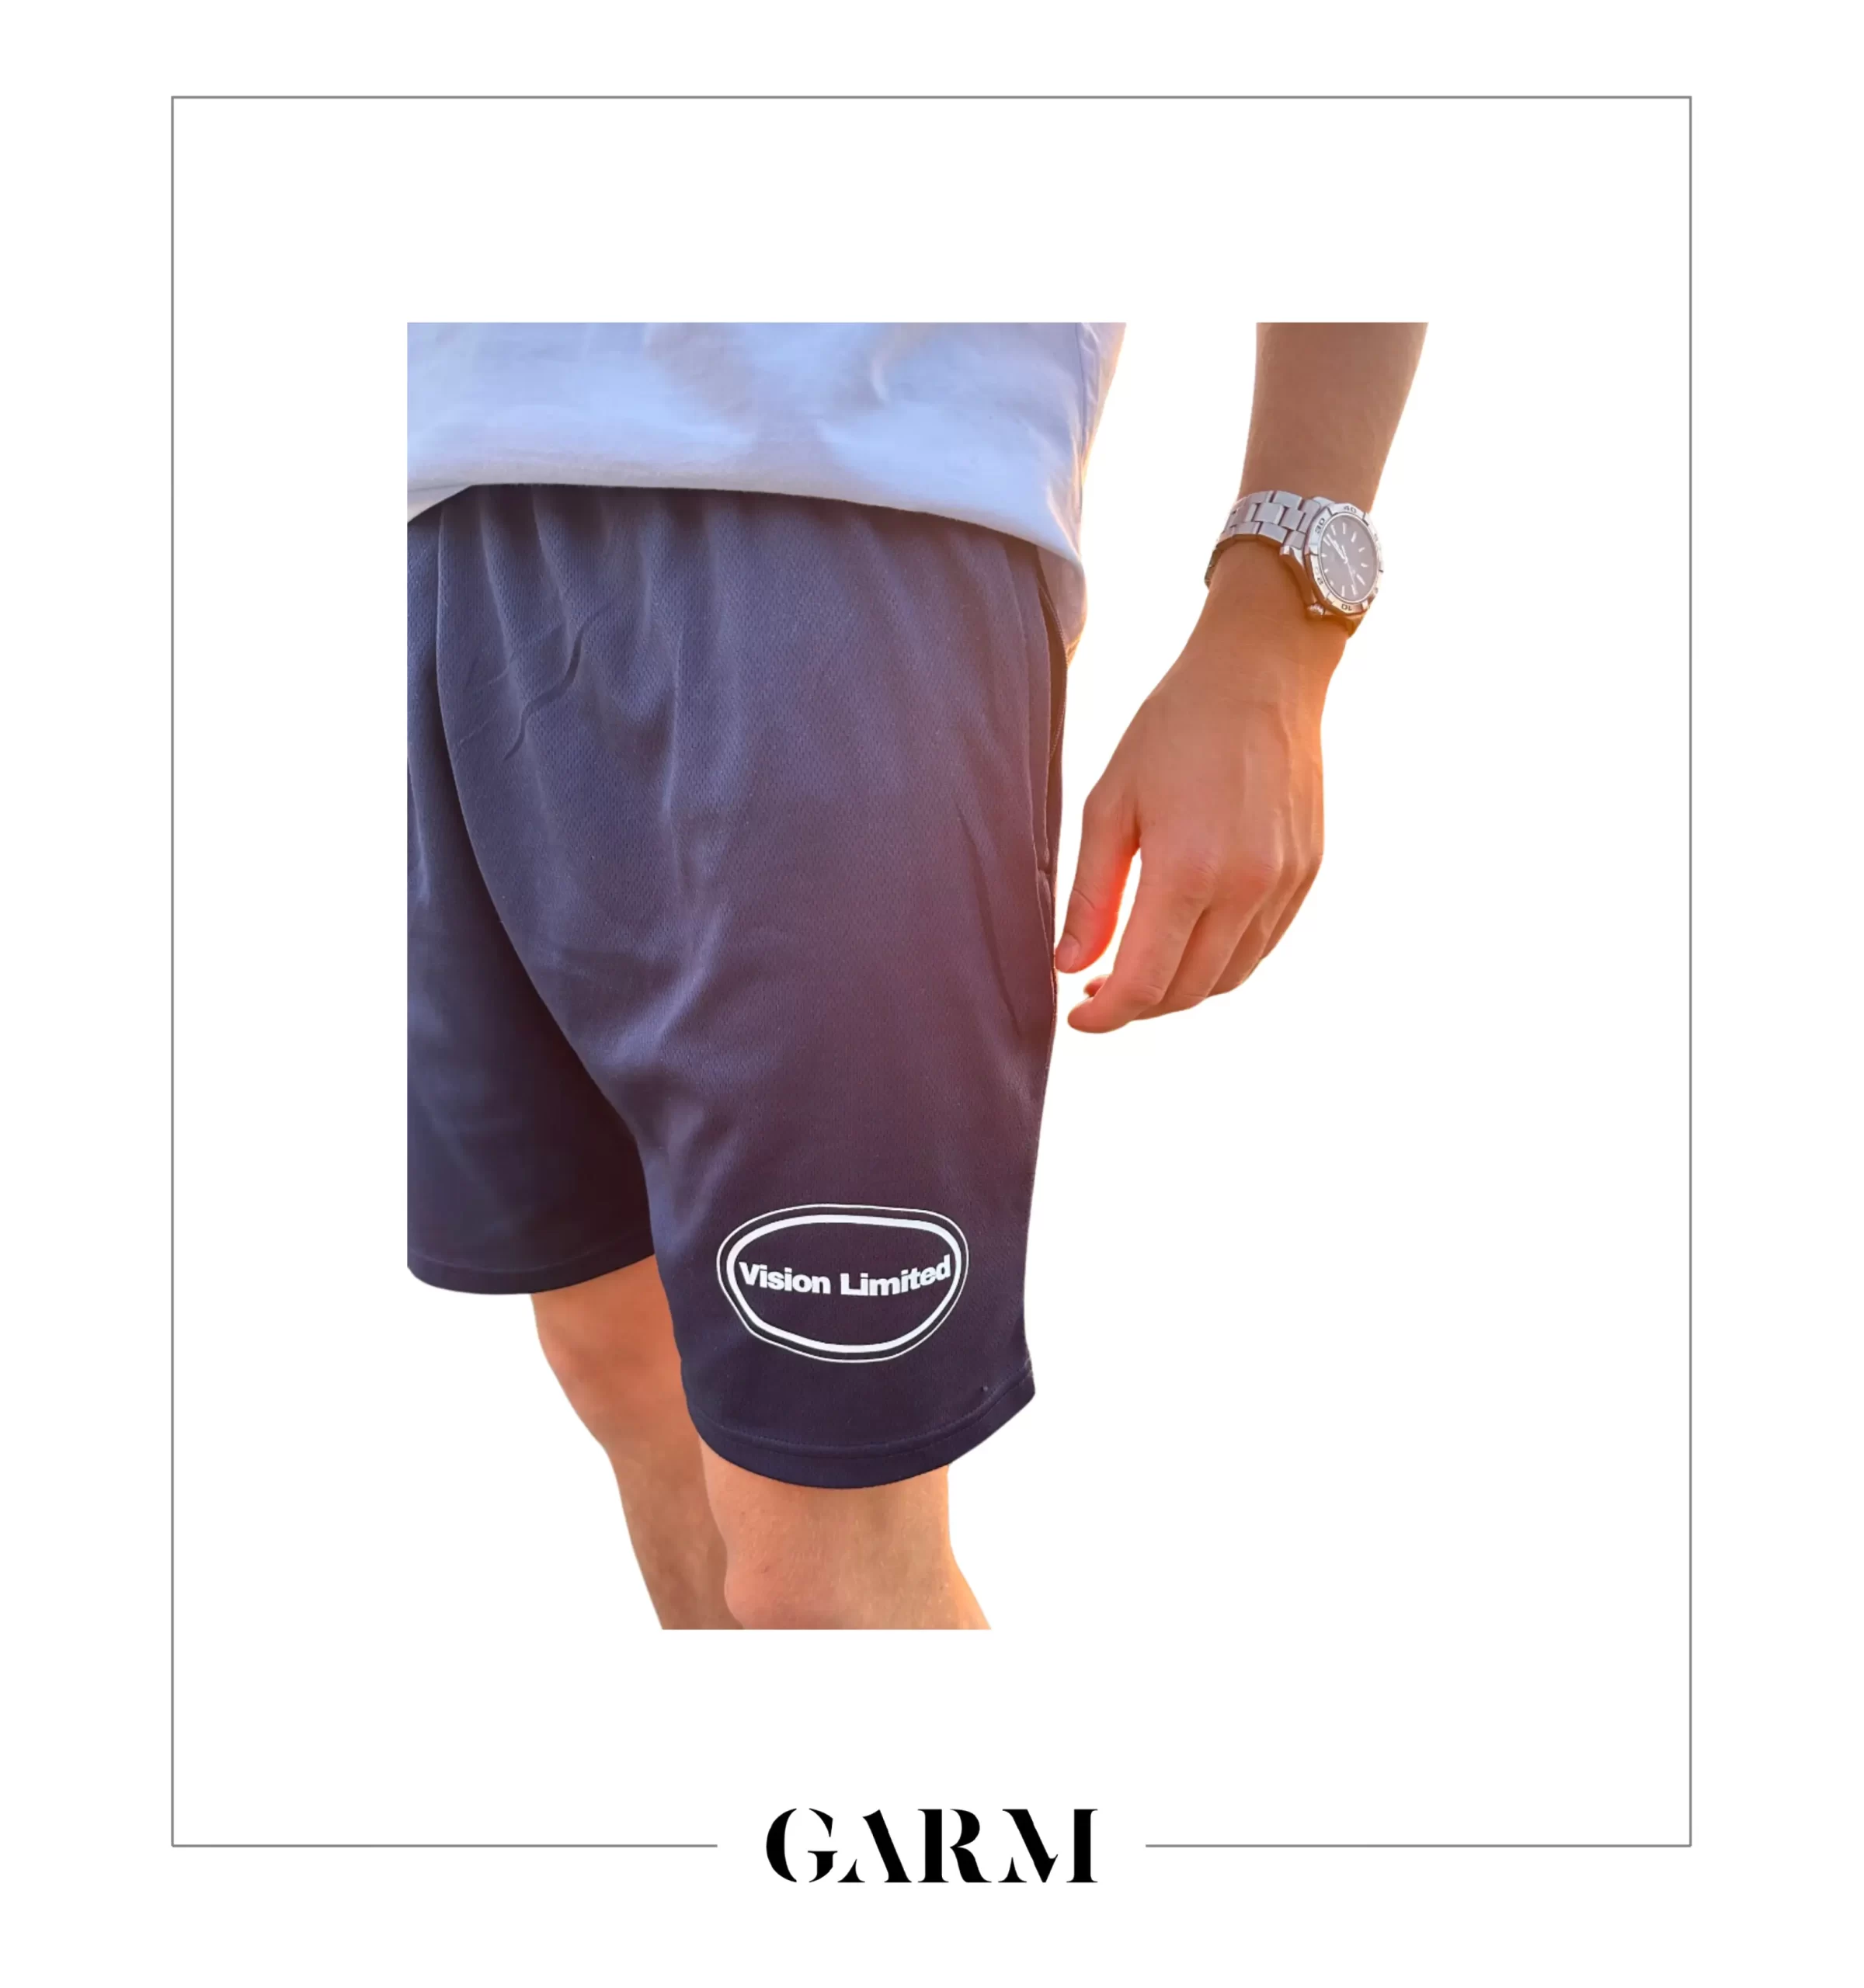 Vision Limited's Grandiose Collection Navy Shorts available on Garm